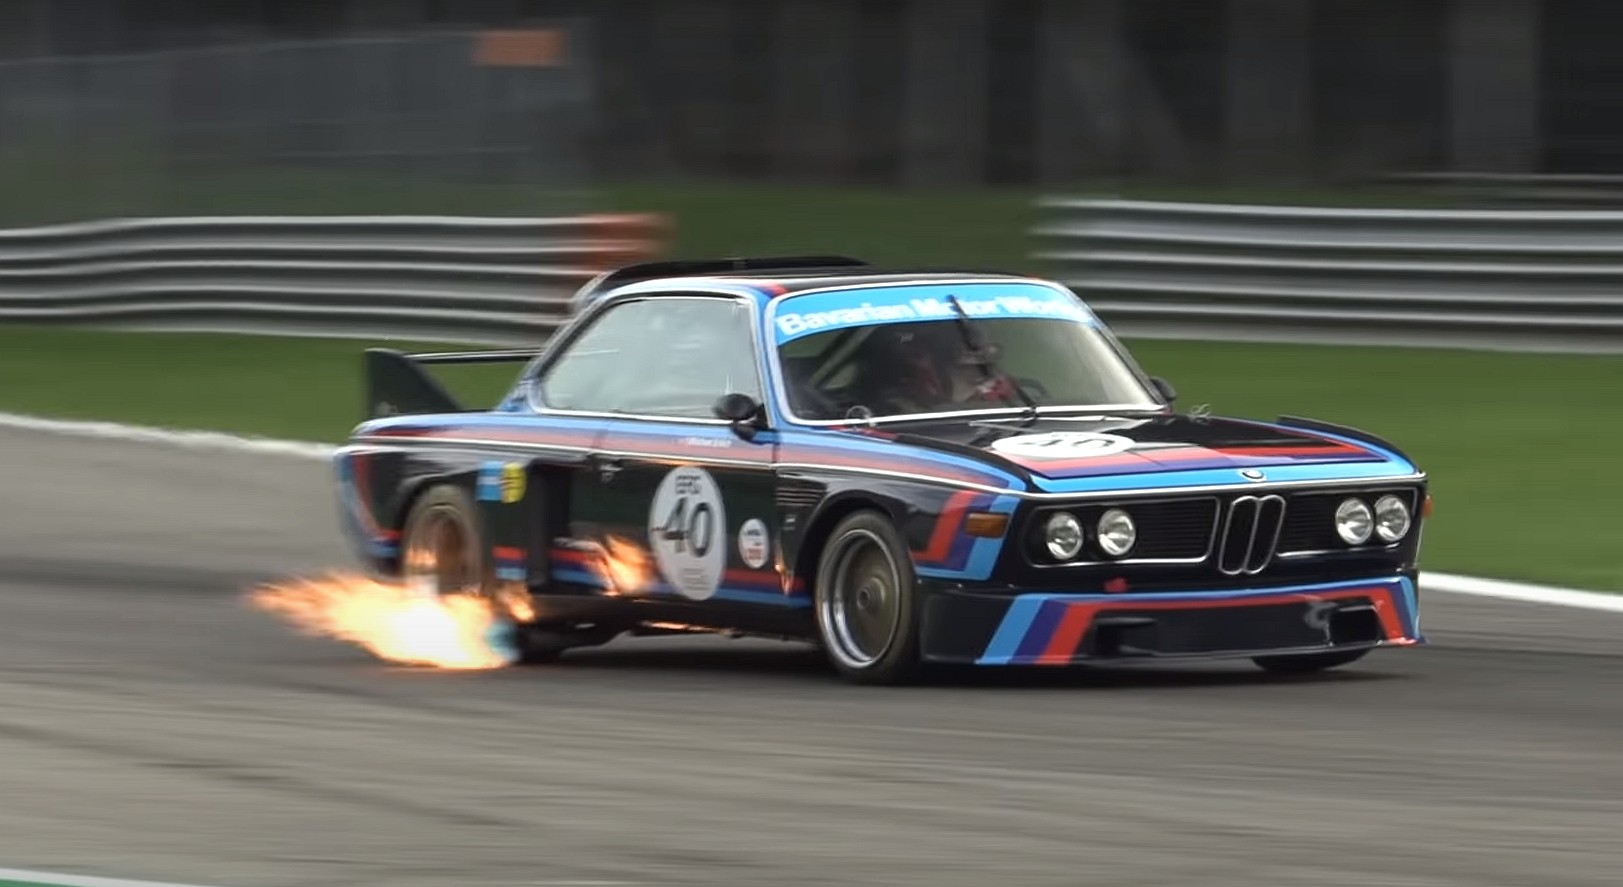 Bmw Csl Batmobile Spitting Flames At Monza Is Vintage Racing